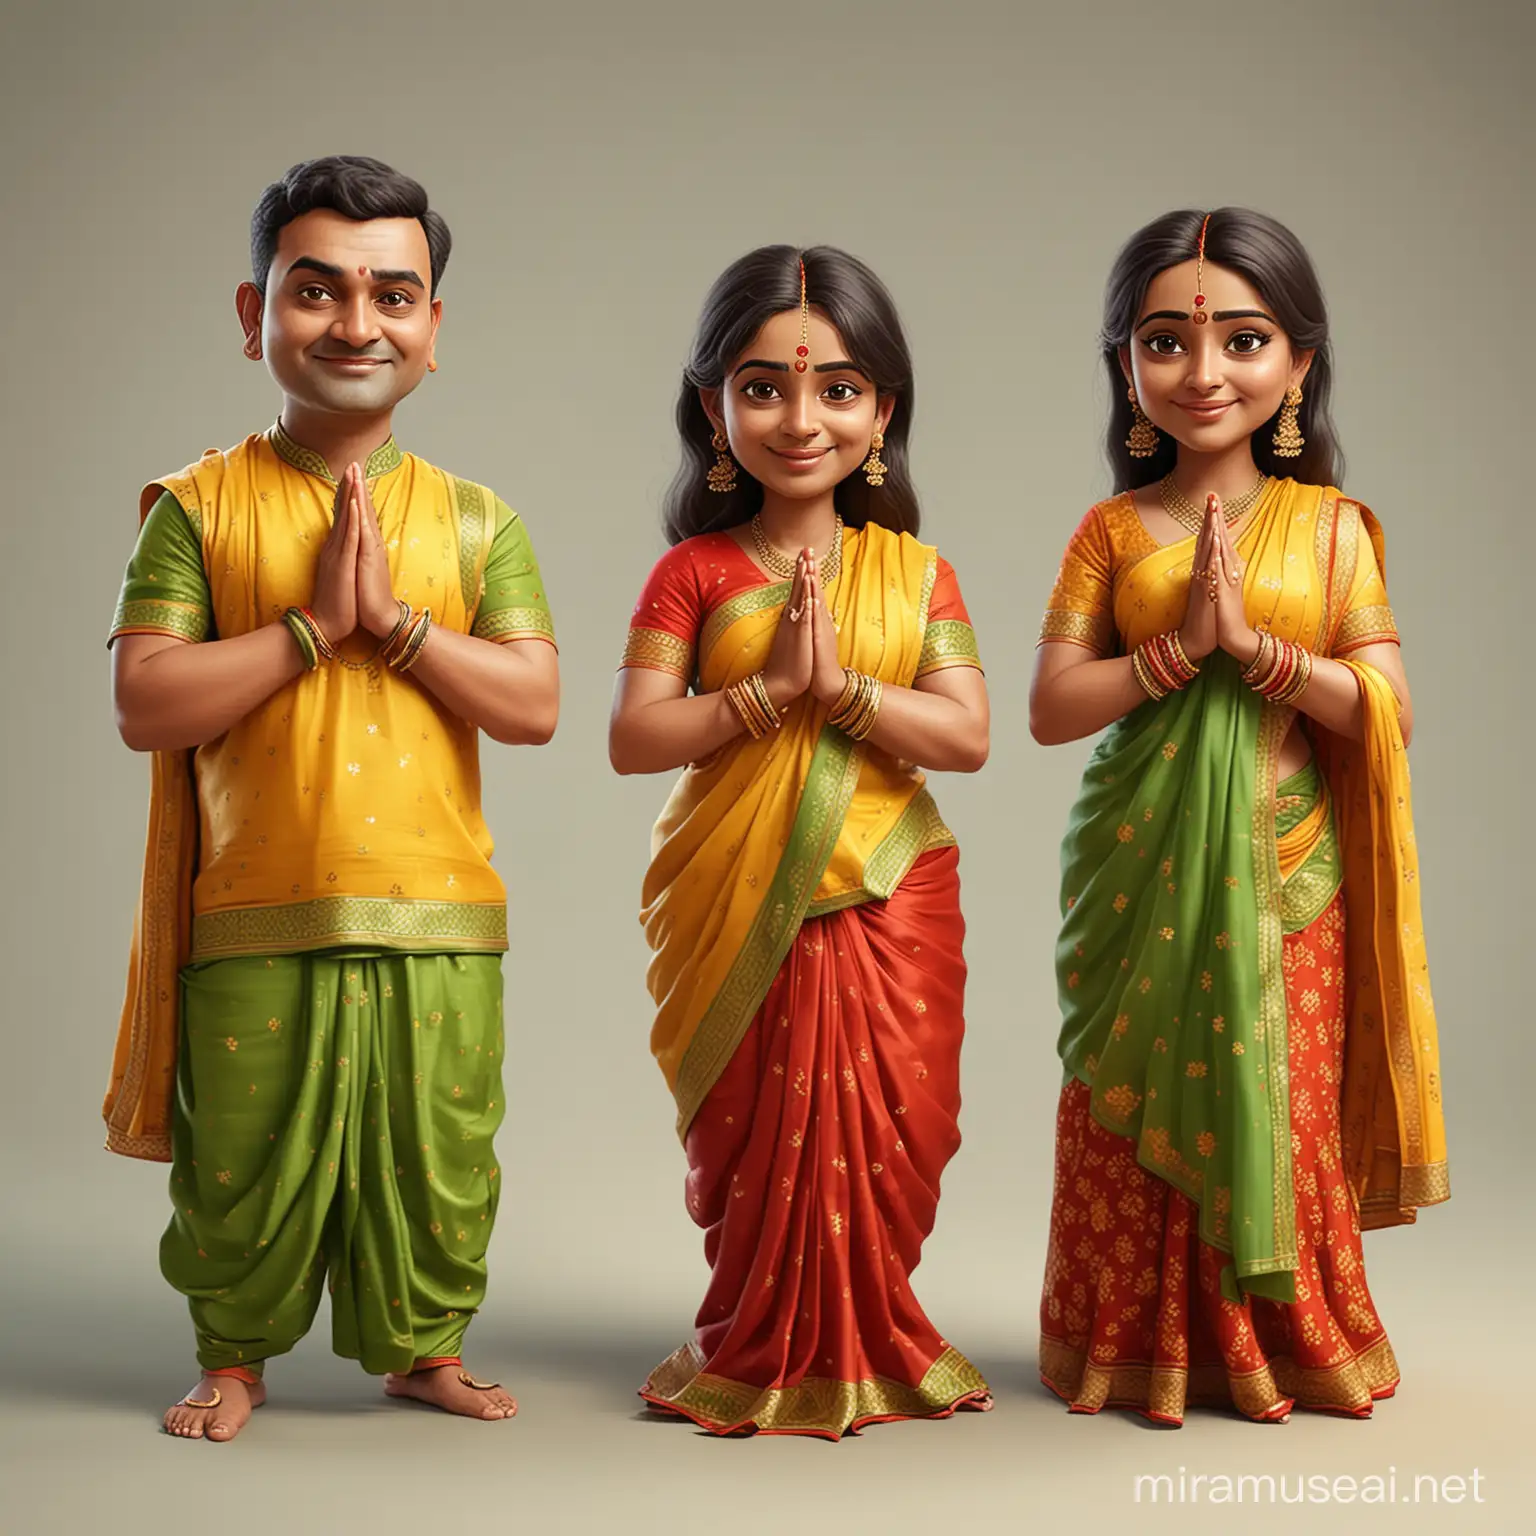 create a caricature of a couple (men and women) who are little fat standing with Folding Hands (doing Namaste) where women is in yellow and red saree and men is in green kurta 
